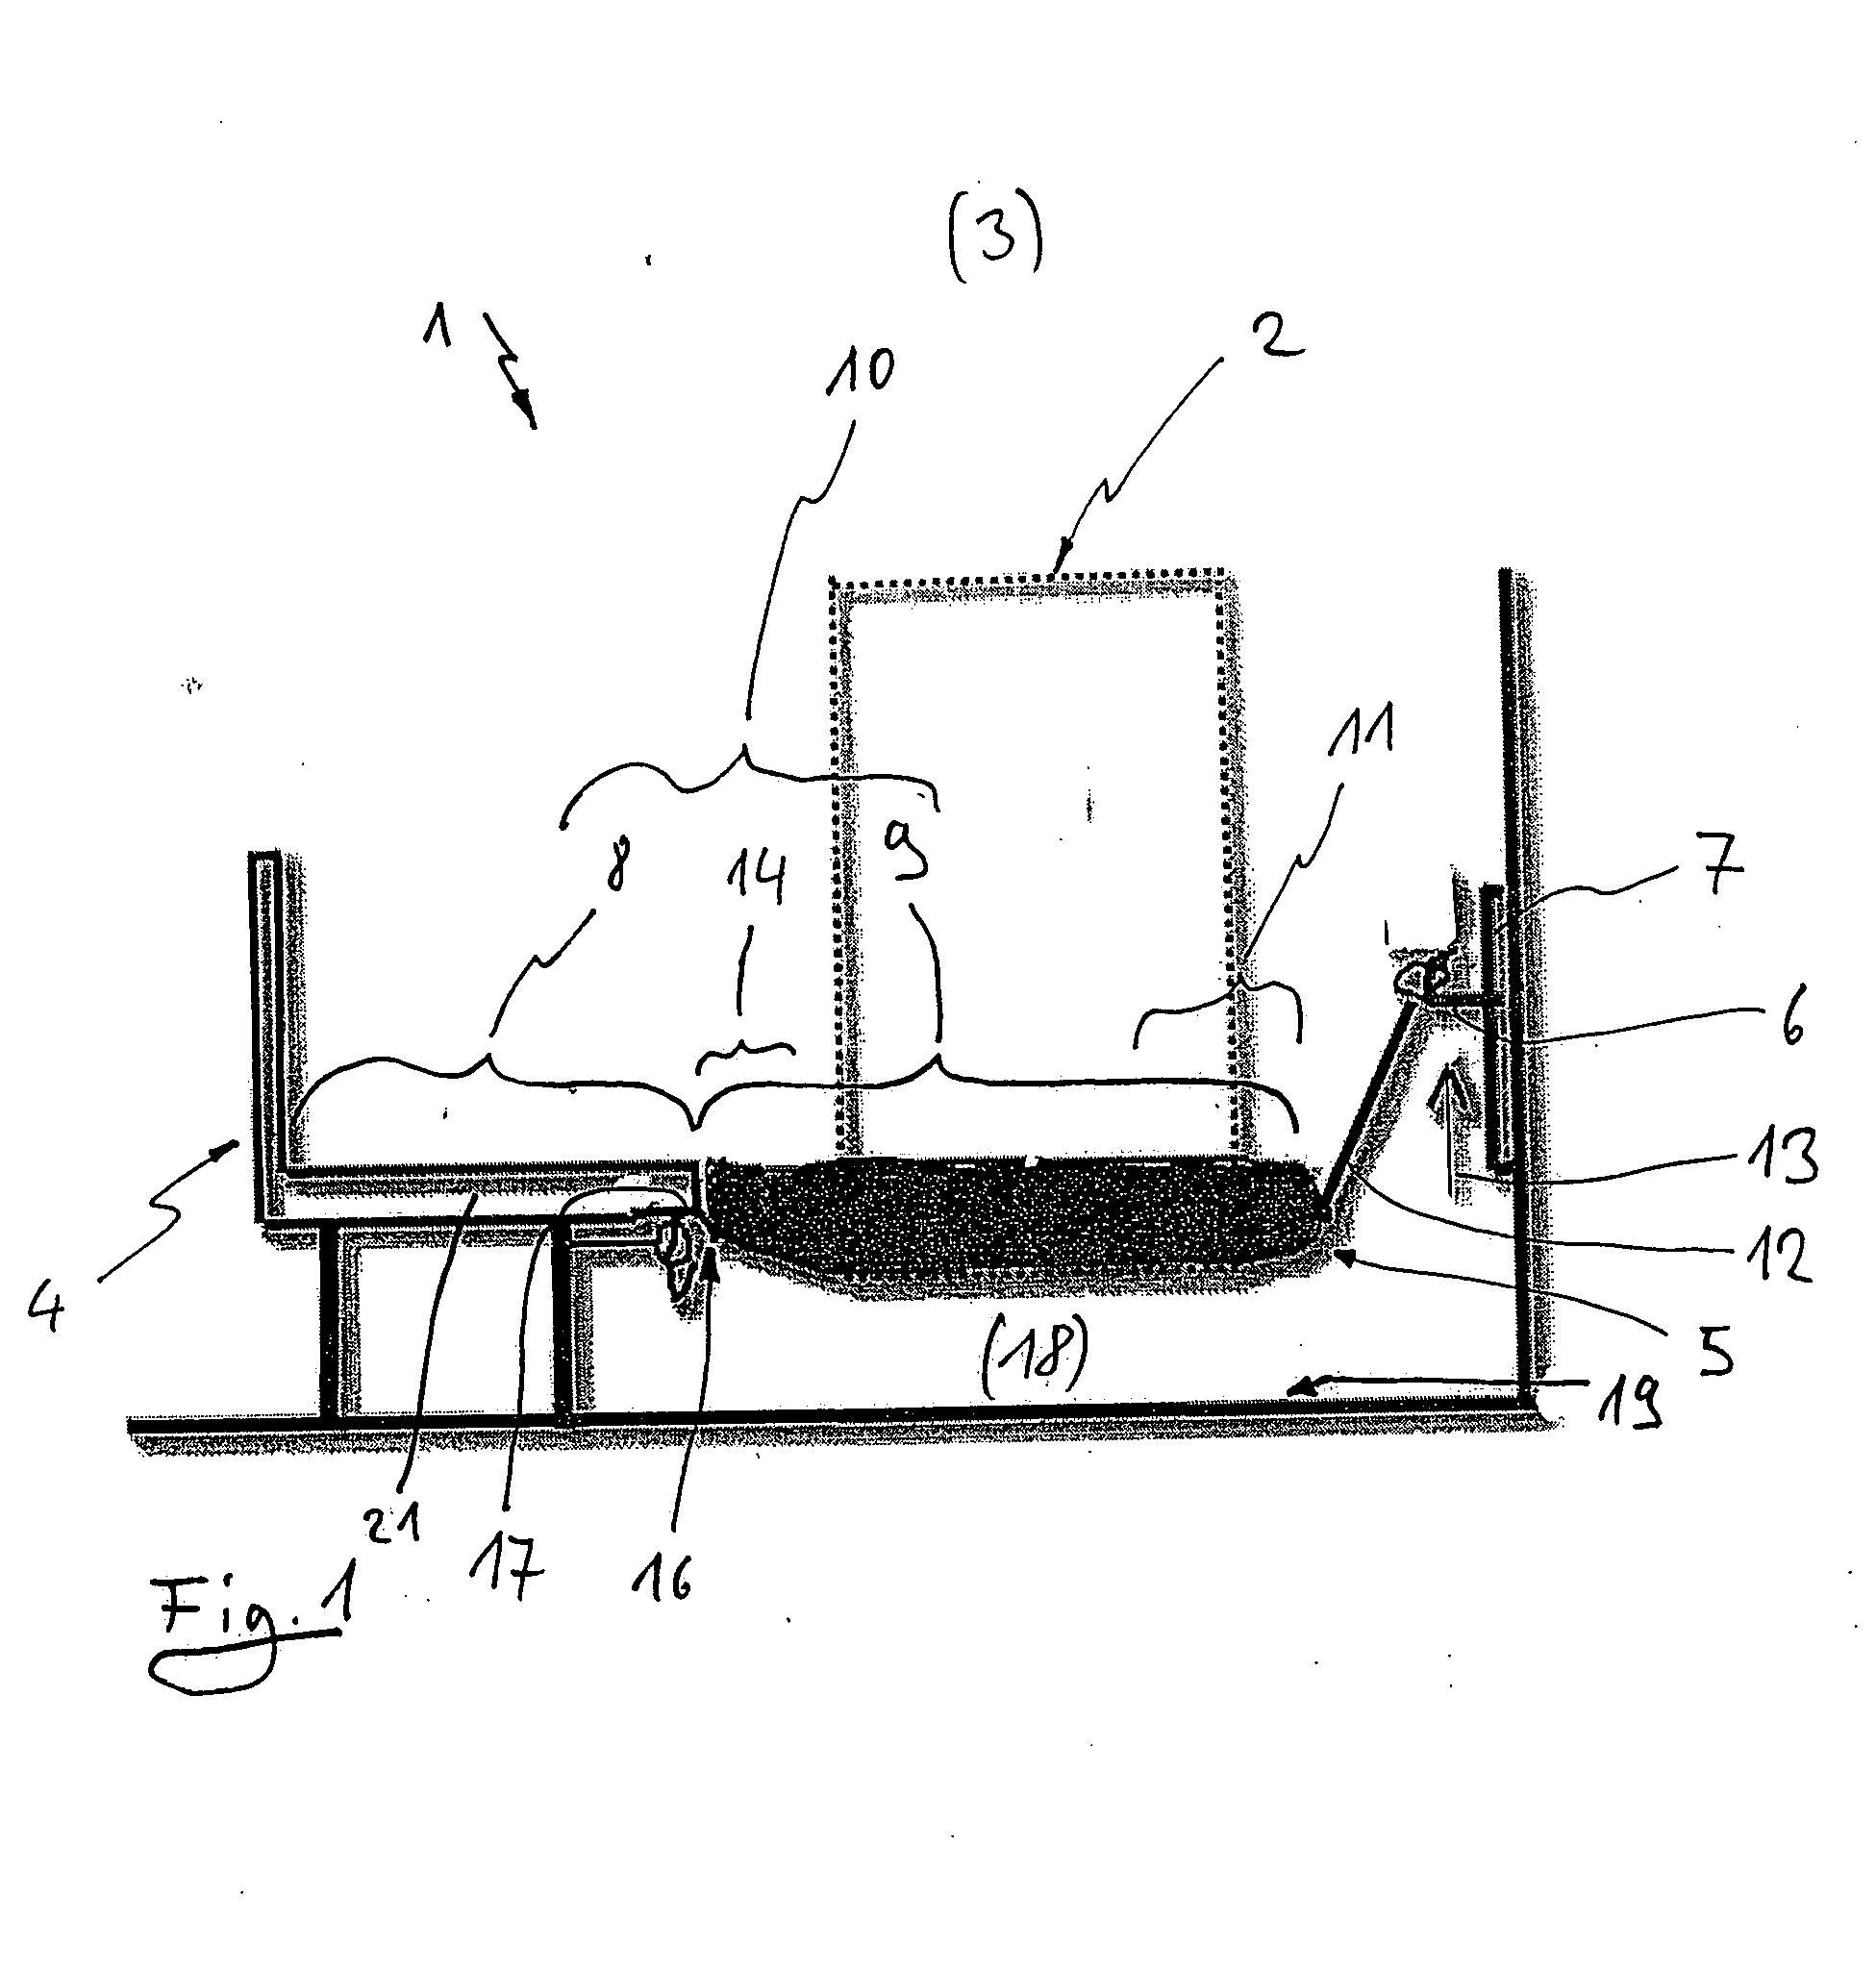 Installable reclining device for emergency medical aid of patients